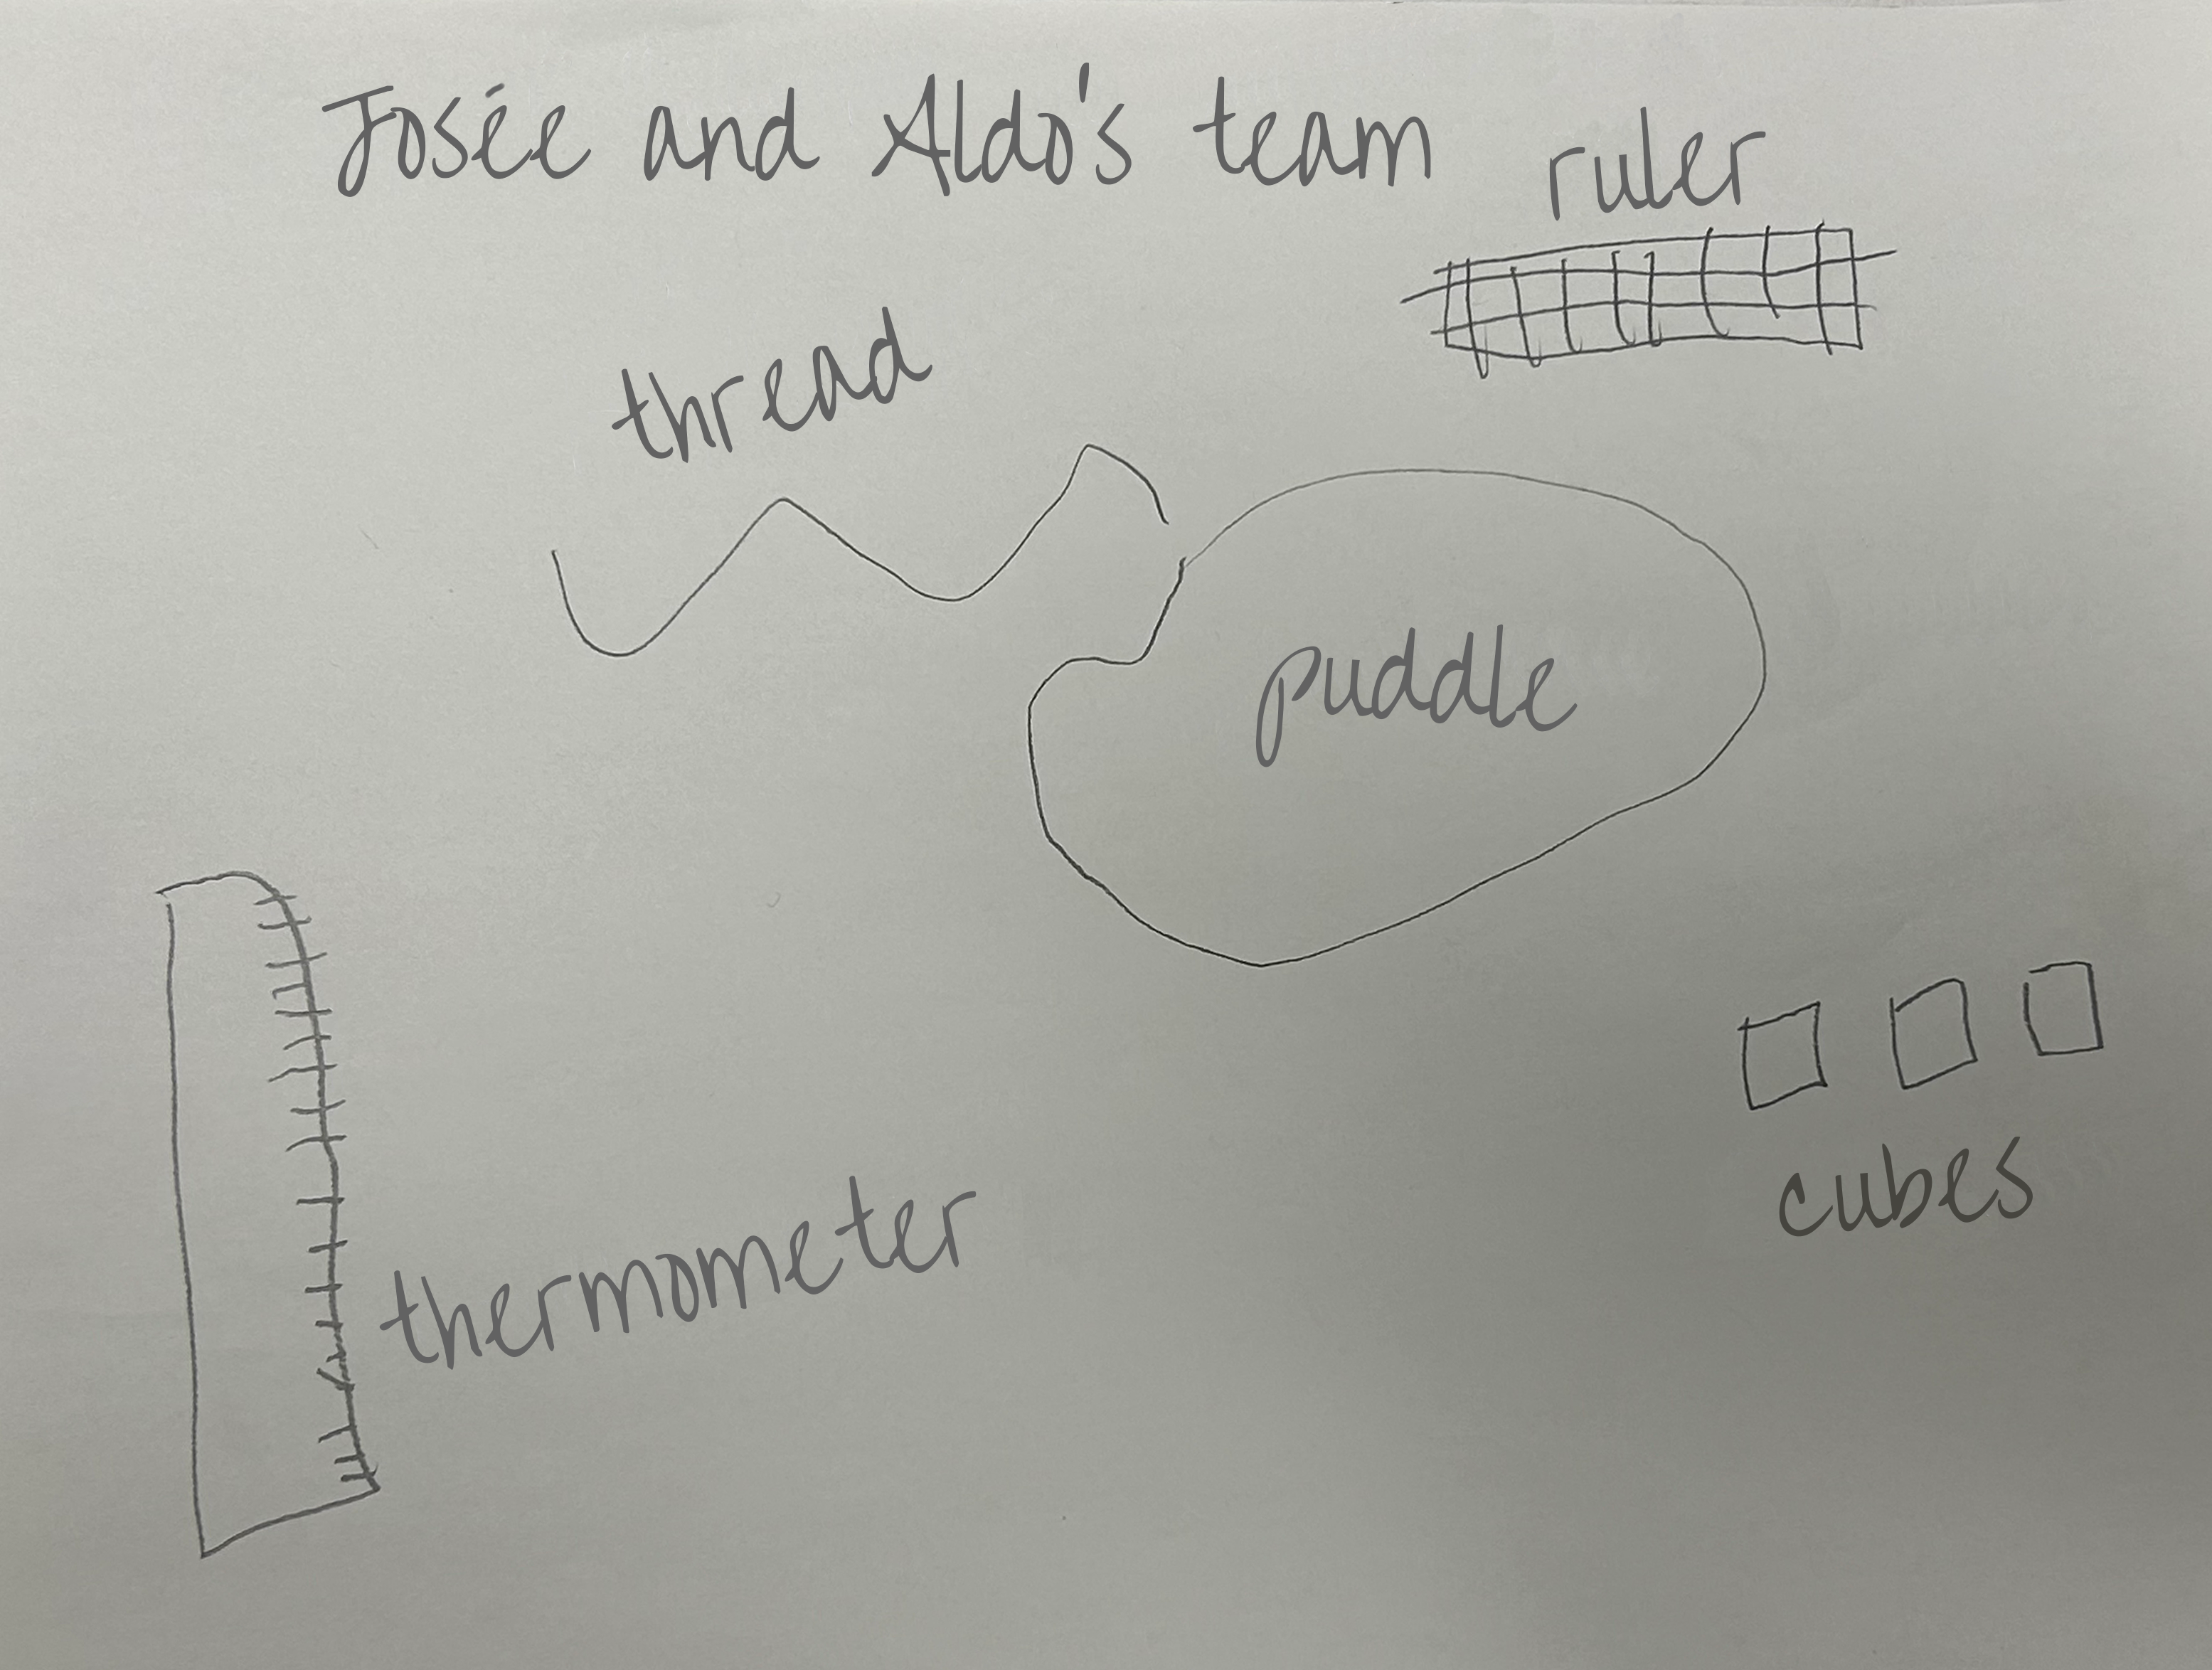 A drawing in which a student explains his procedure and the tools used.